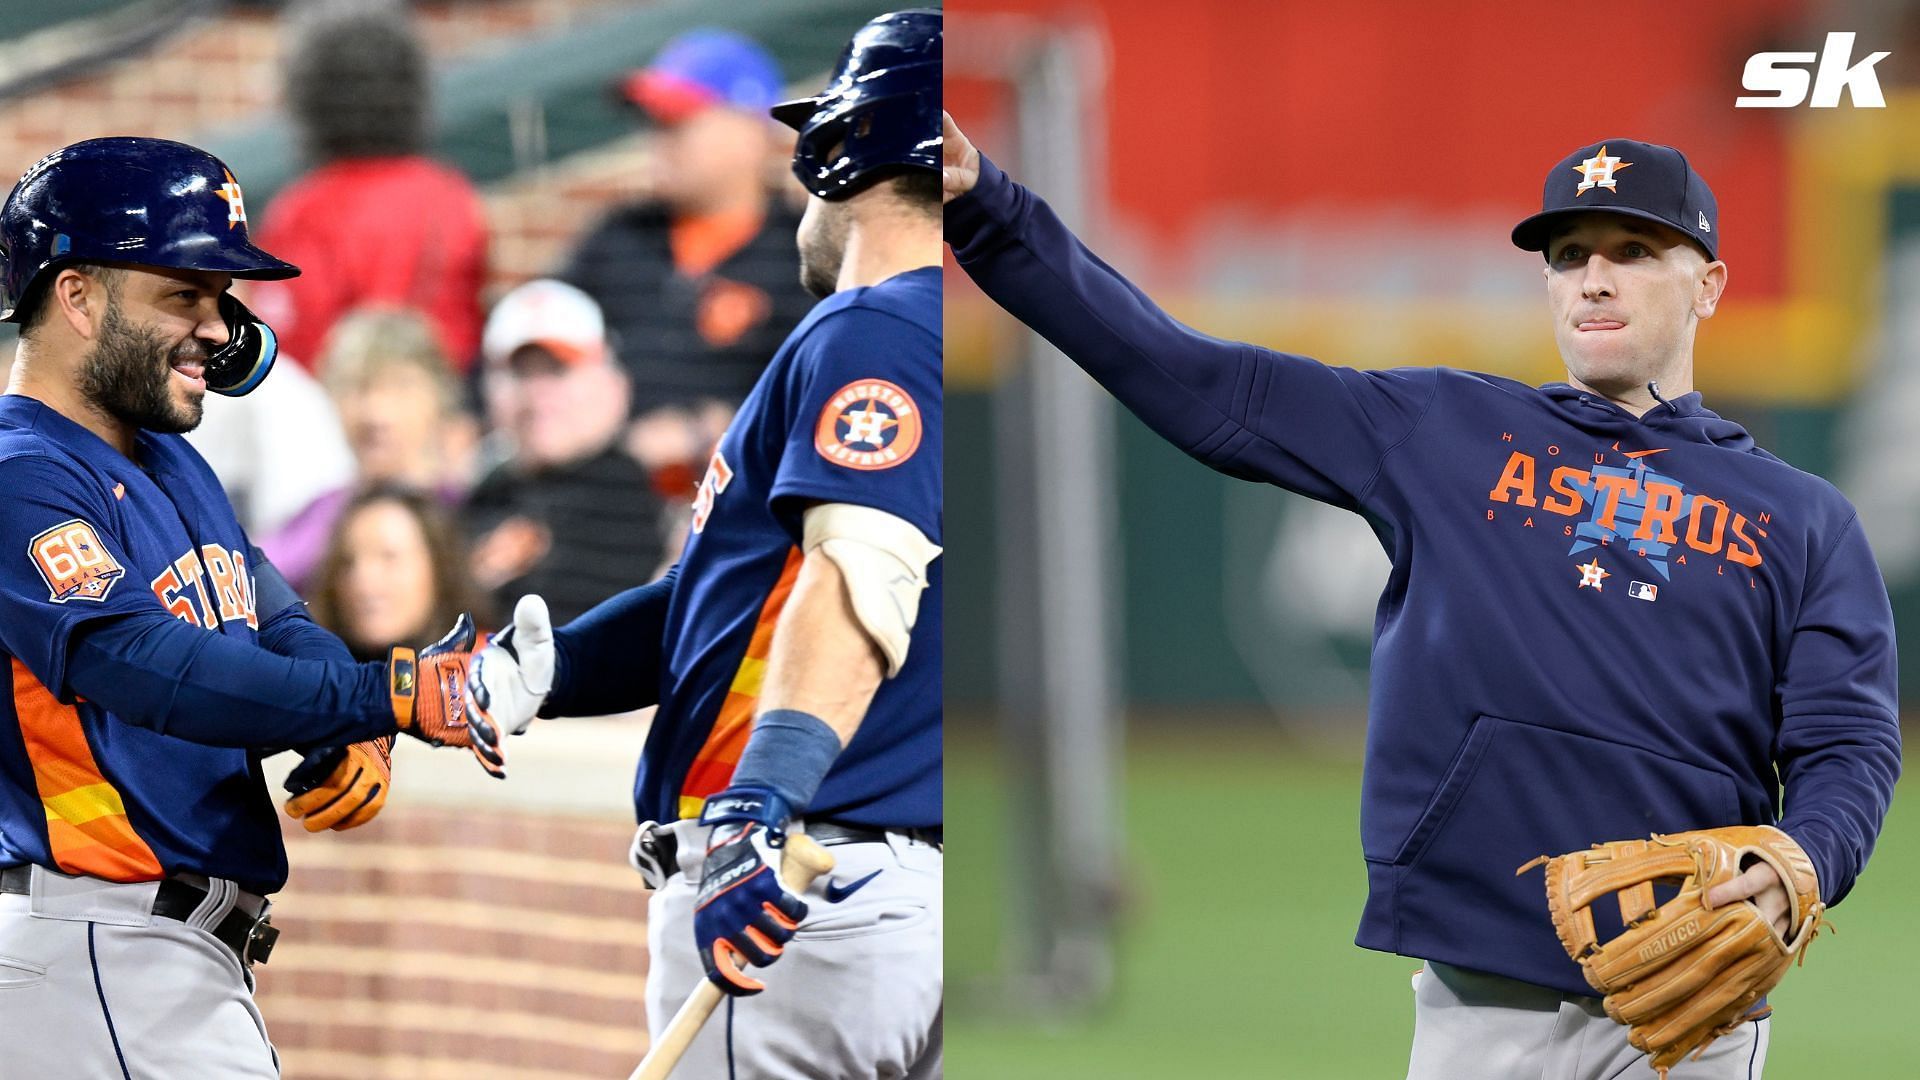 Alex Bregman has given Jose Altuve one of the best compliments possible